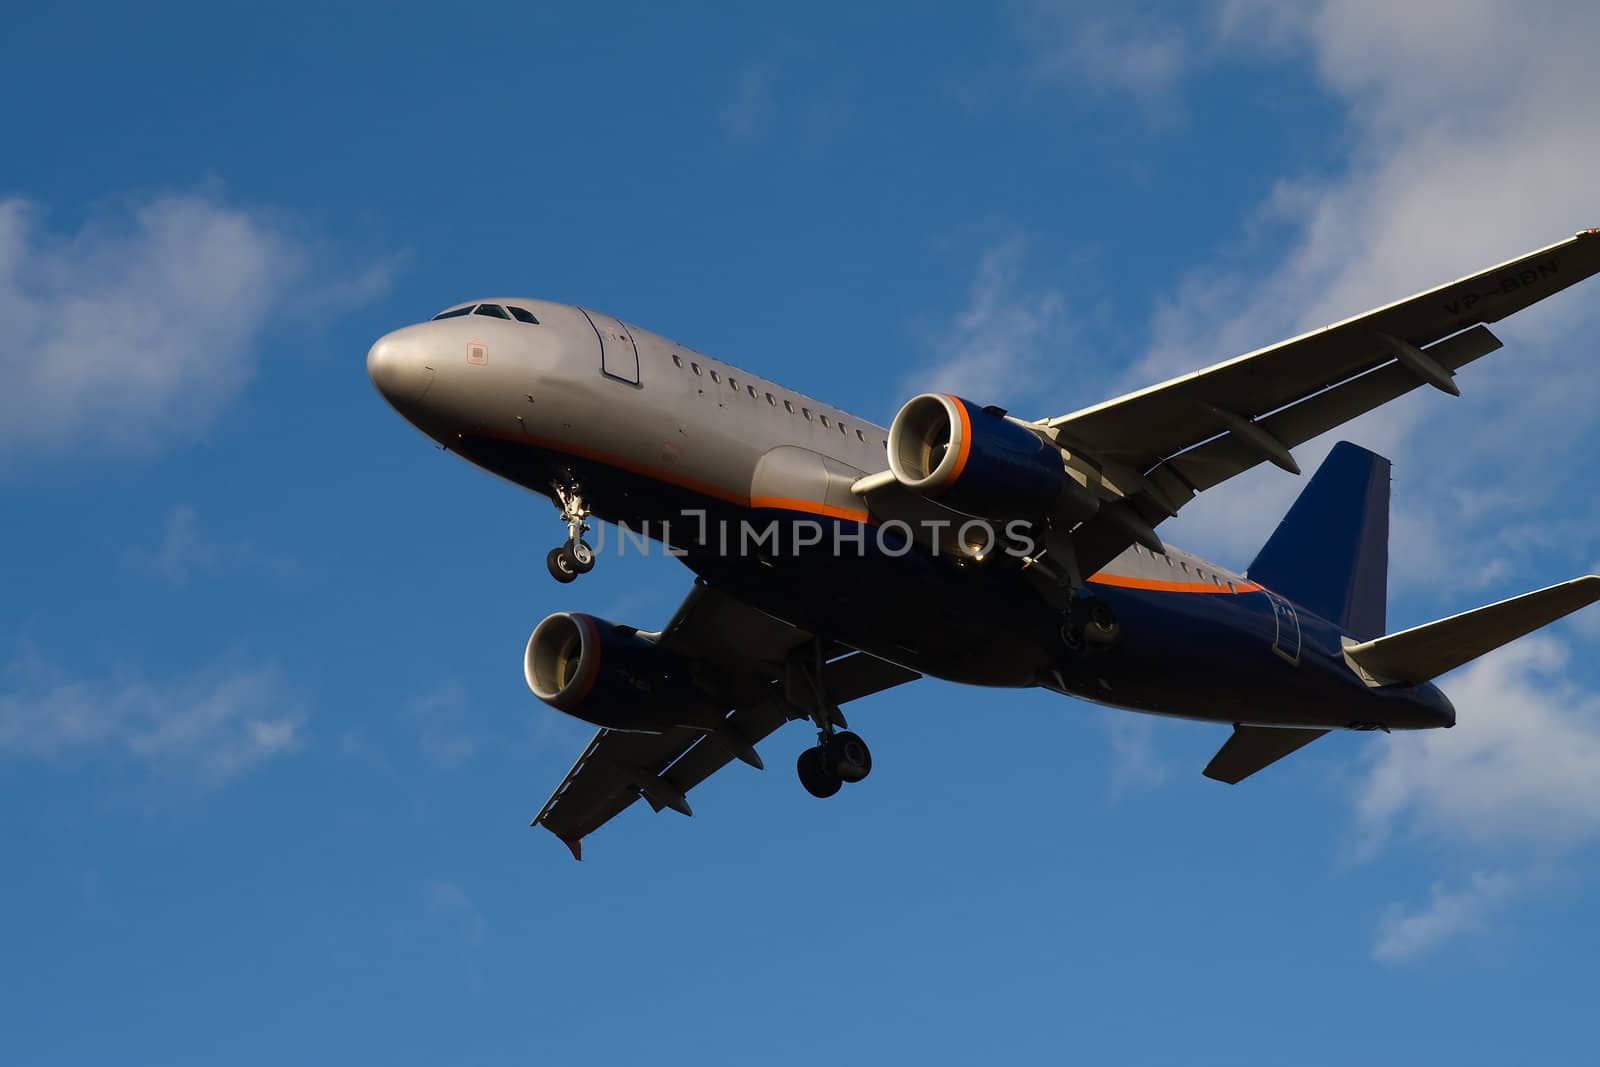 Passenger jet flying in blue sky with clouds